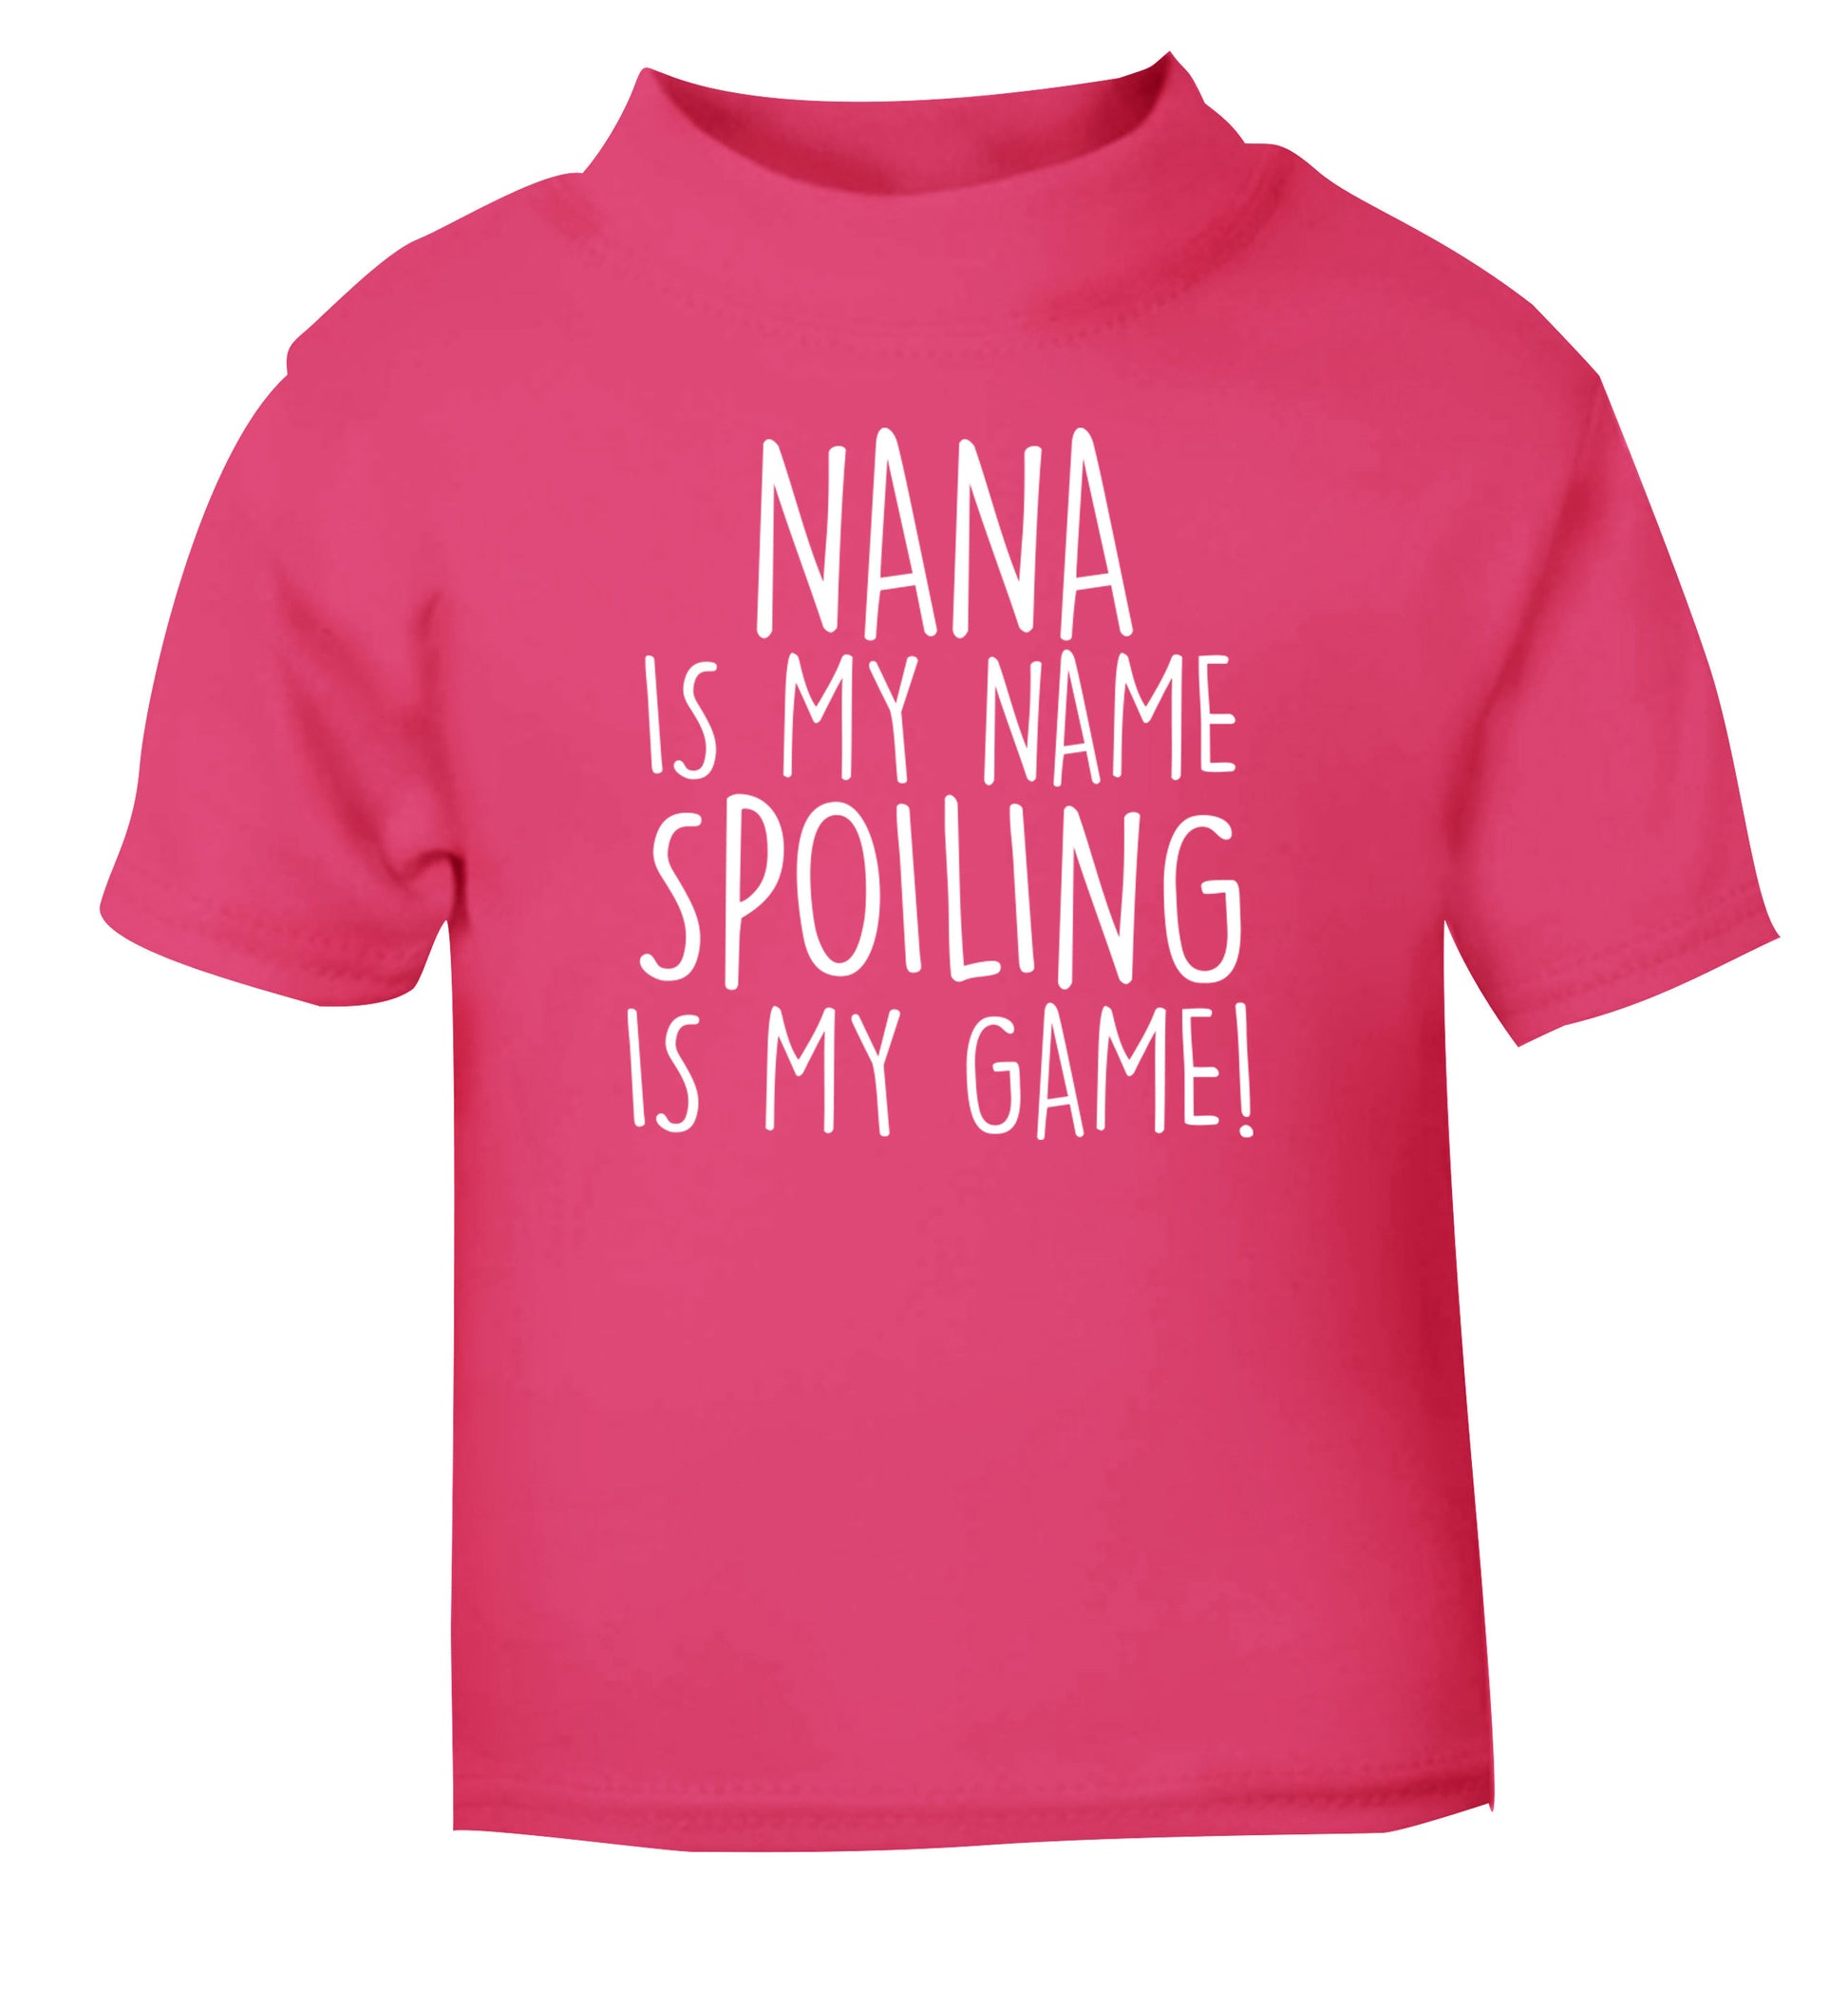 Nana is my name, spoiling is my game pink Baby Toddler Tshirt 2 Years